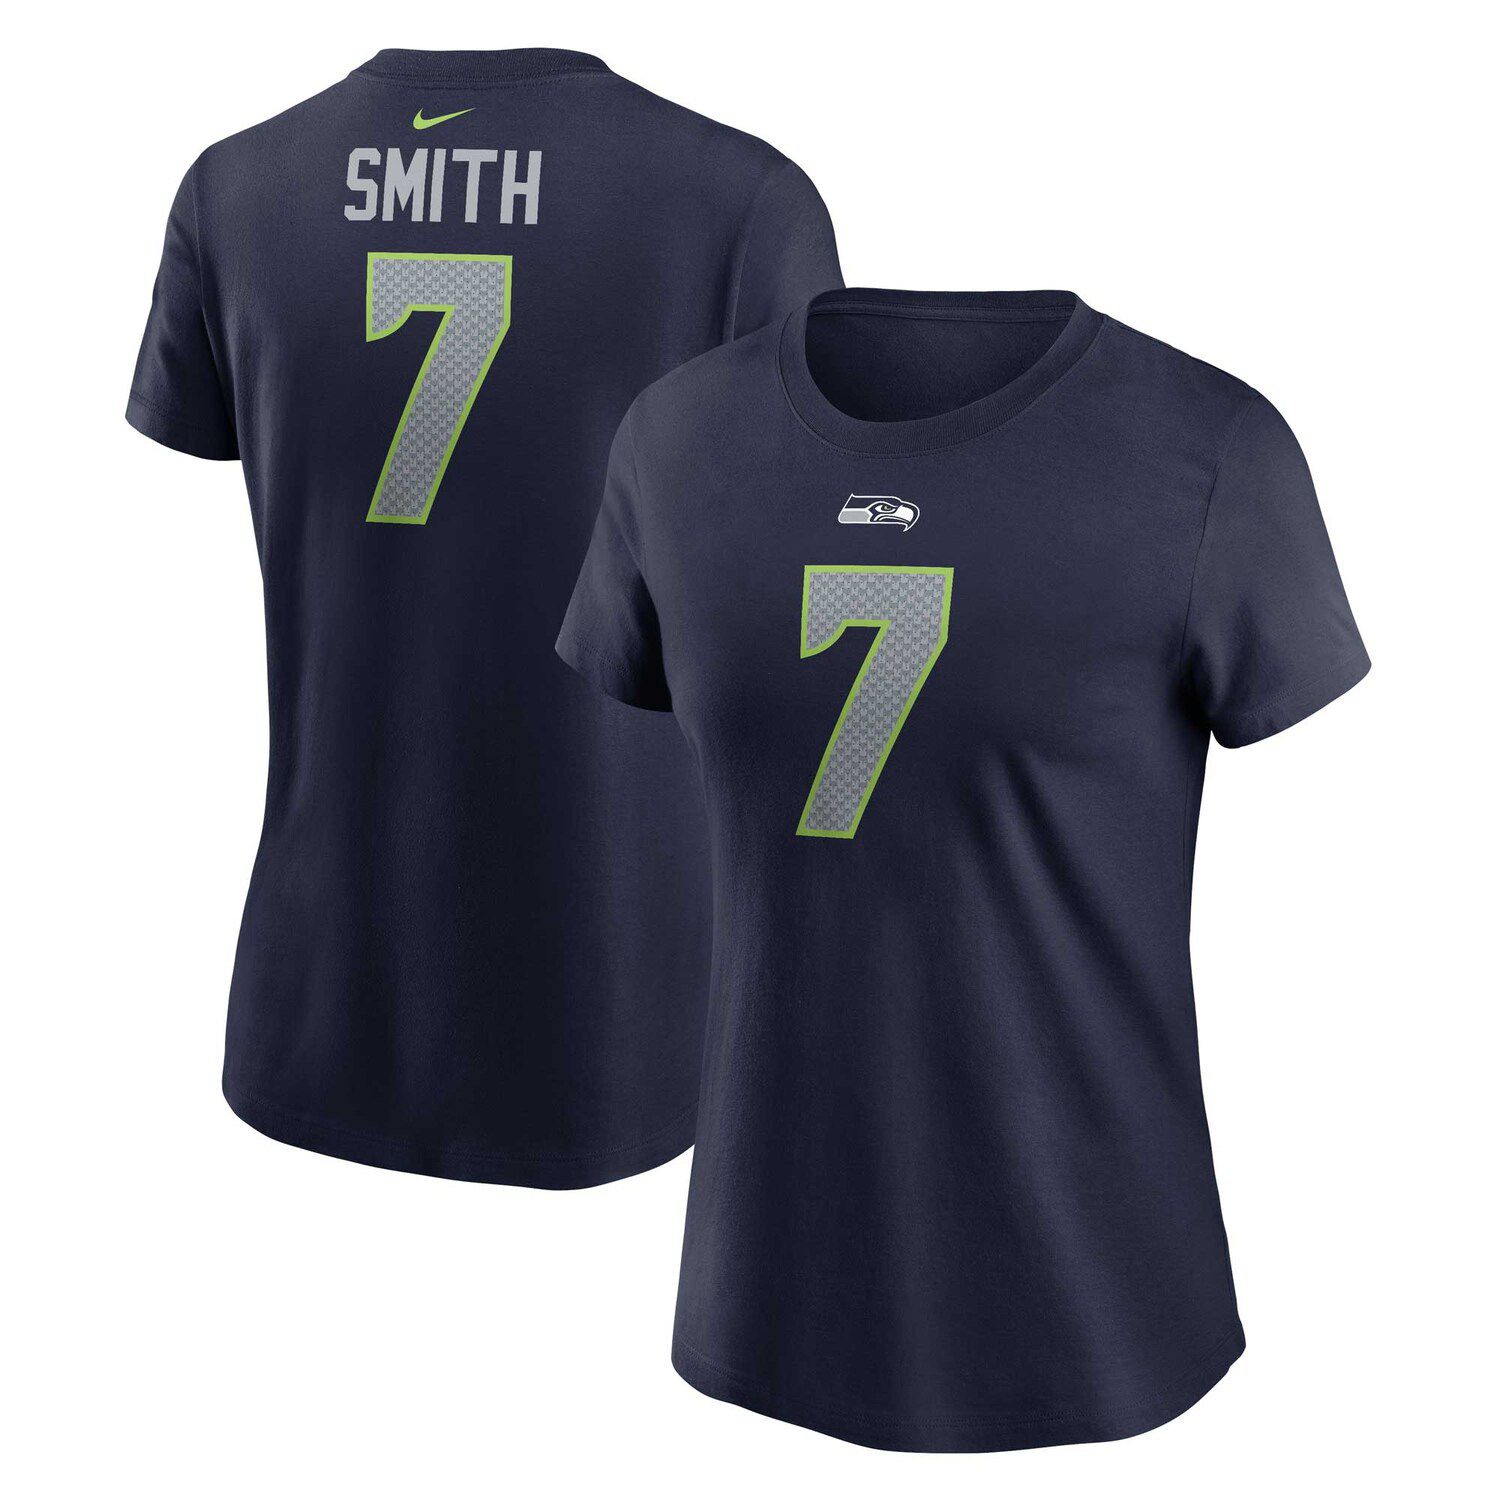 Smith Geno home jersey